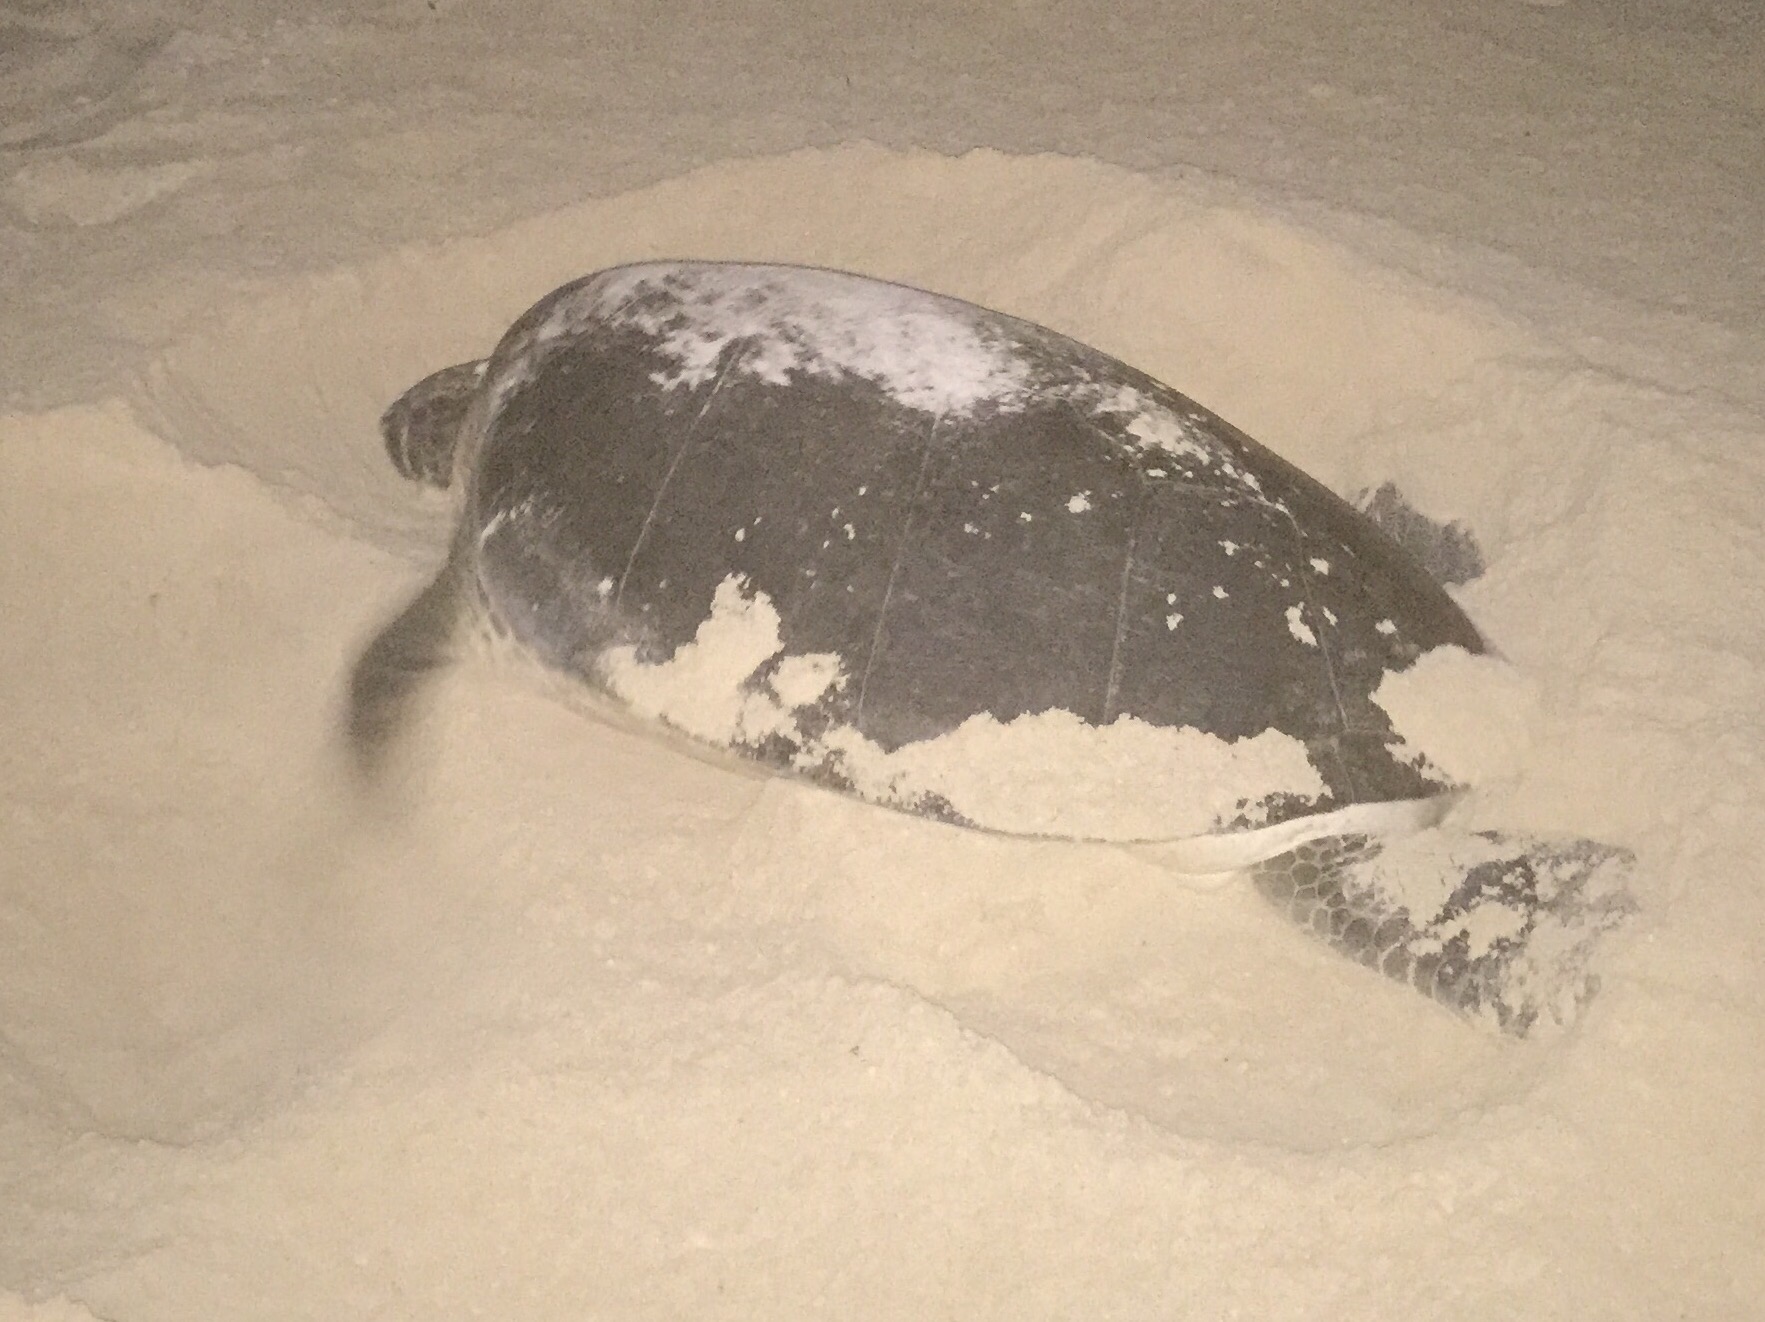 A female sea turtle laying her eggs on a Cancun beach. Photo copyright Valerie Duty Citrano www.PieLadyLife.com